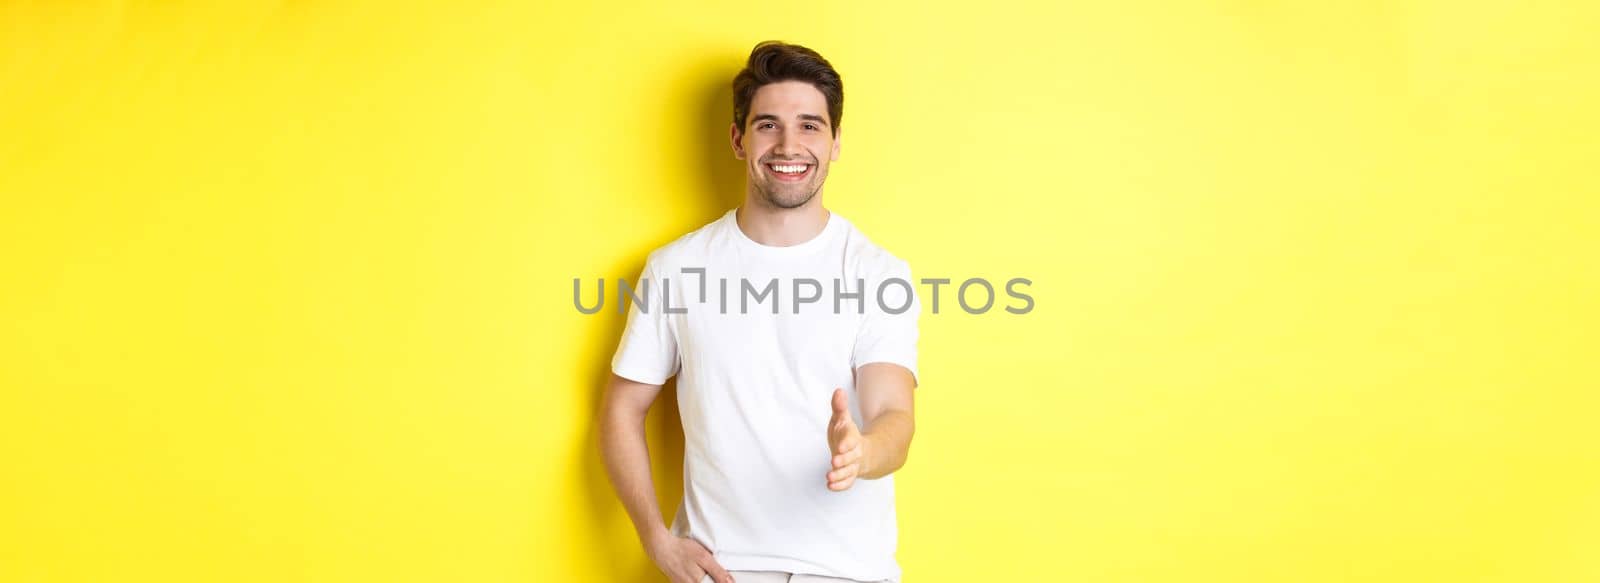 Handsome and confident man extending hand for handshake, greeting you, saying hello, standing in white t-shirt over yellow background by Benzoix